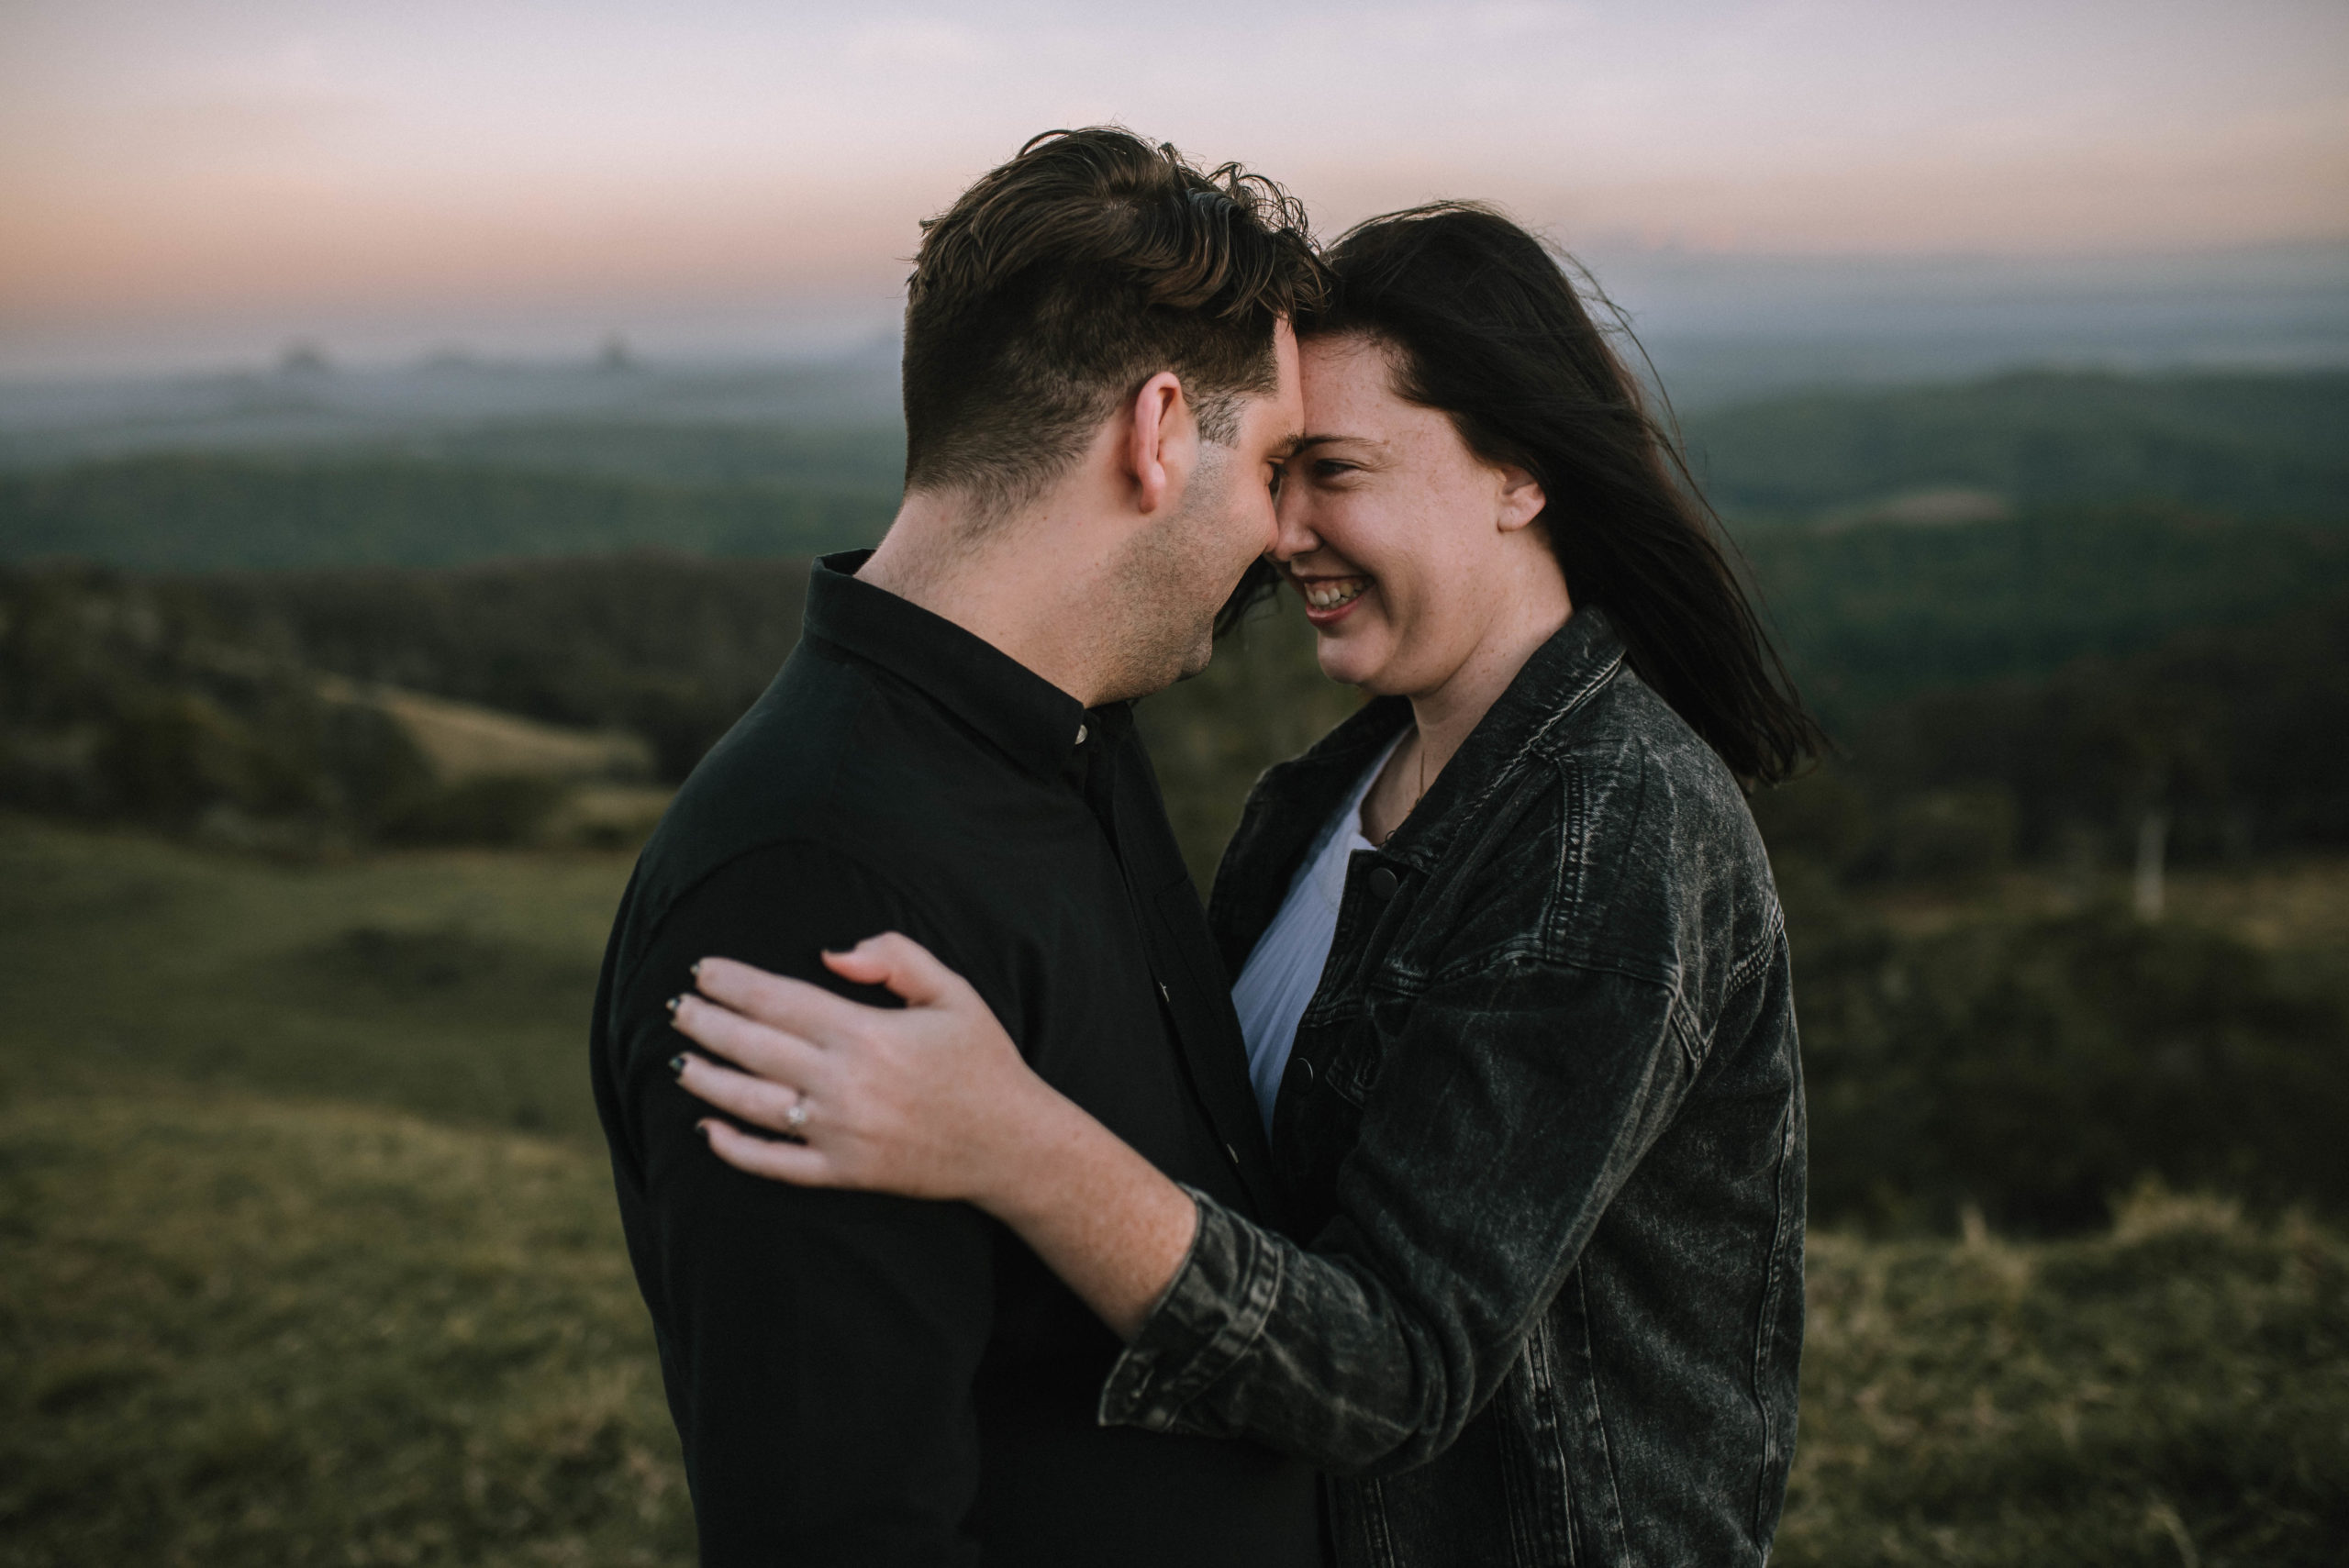 Engagement Session at Maleny